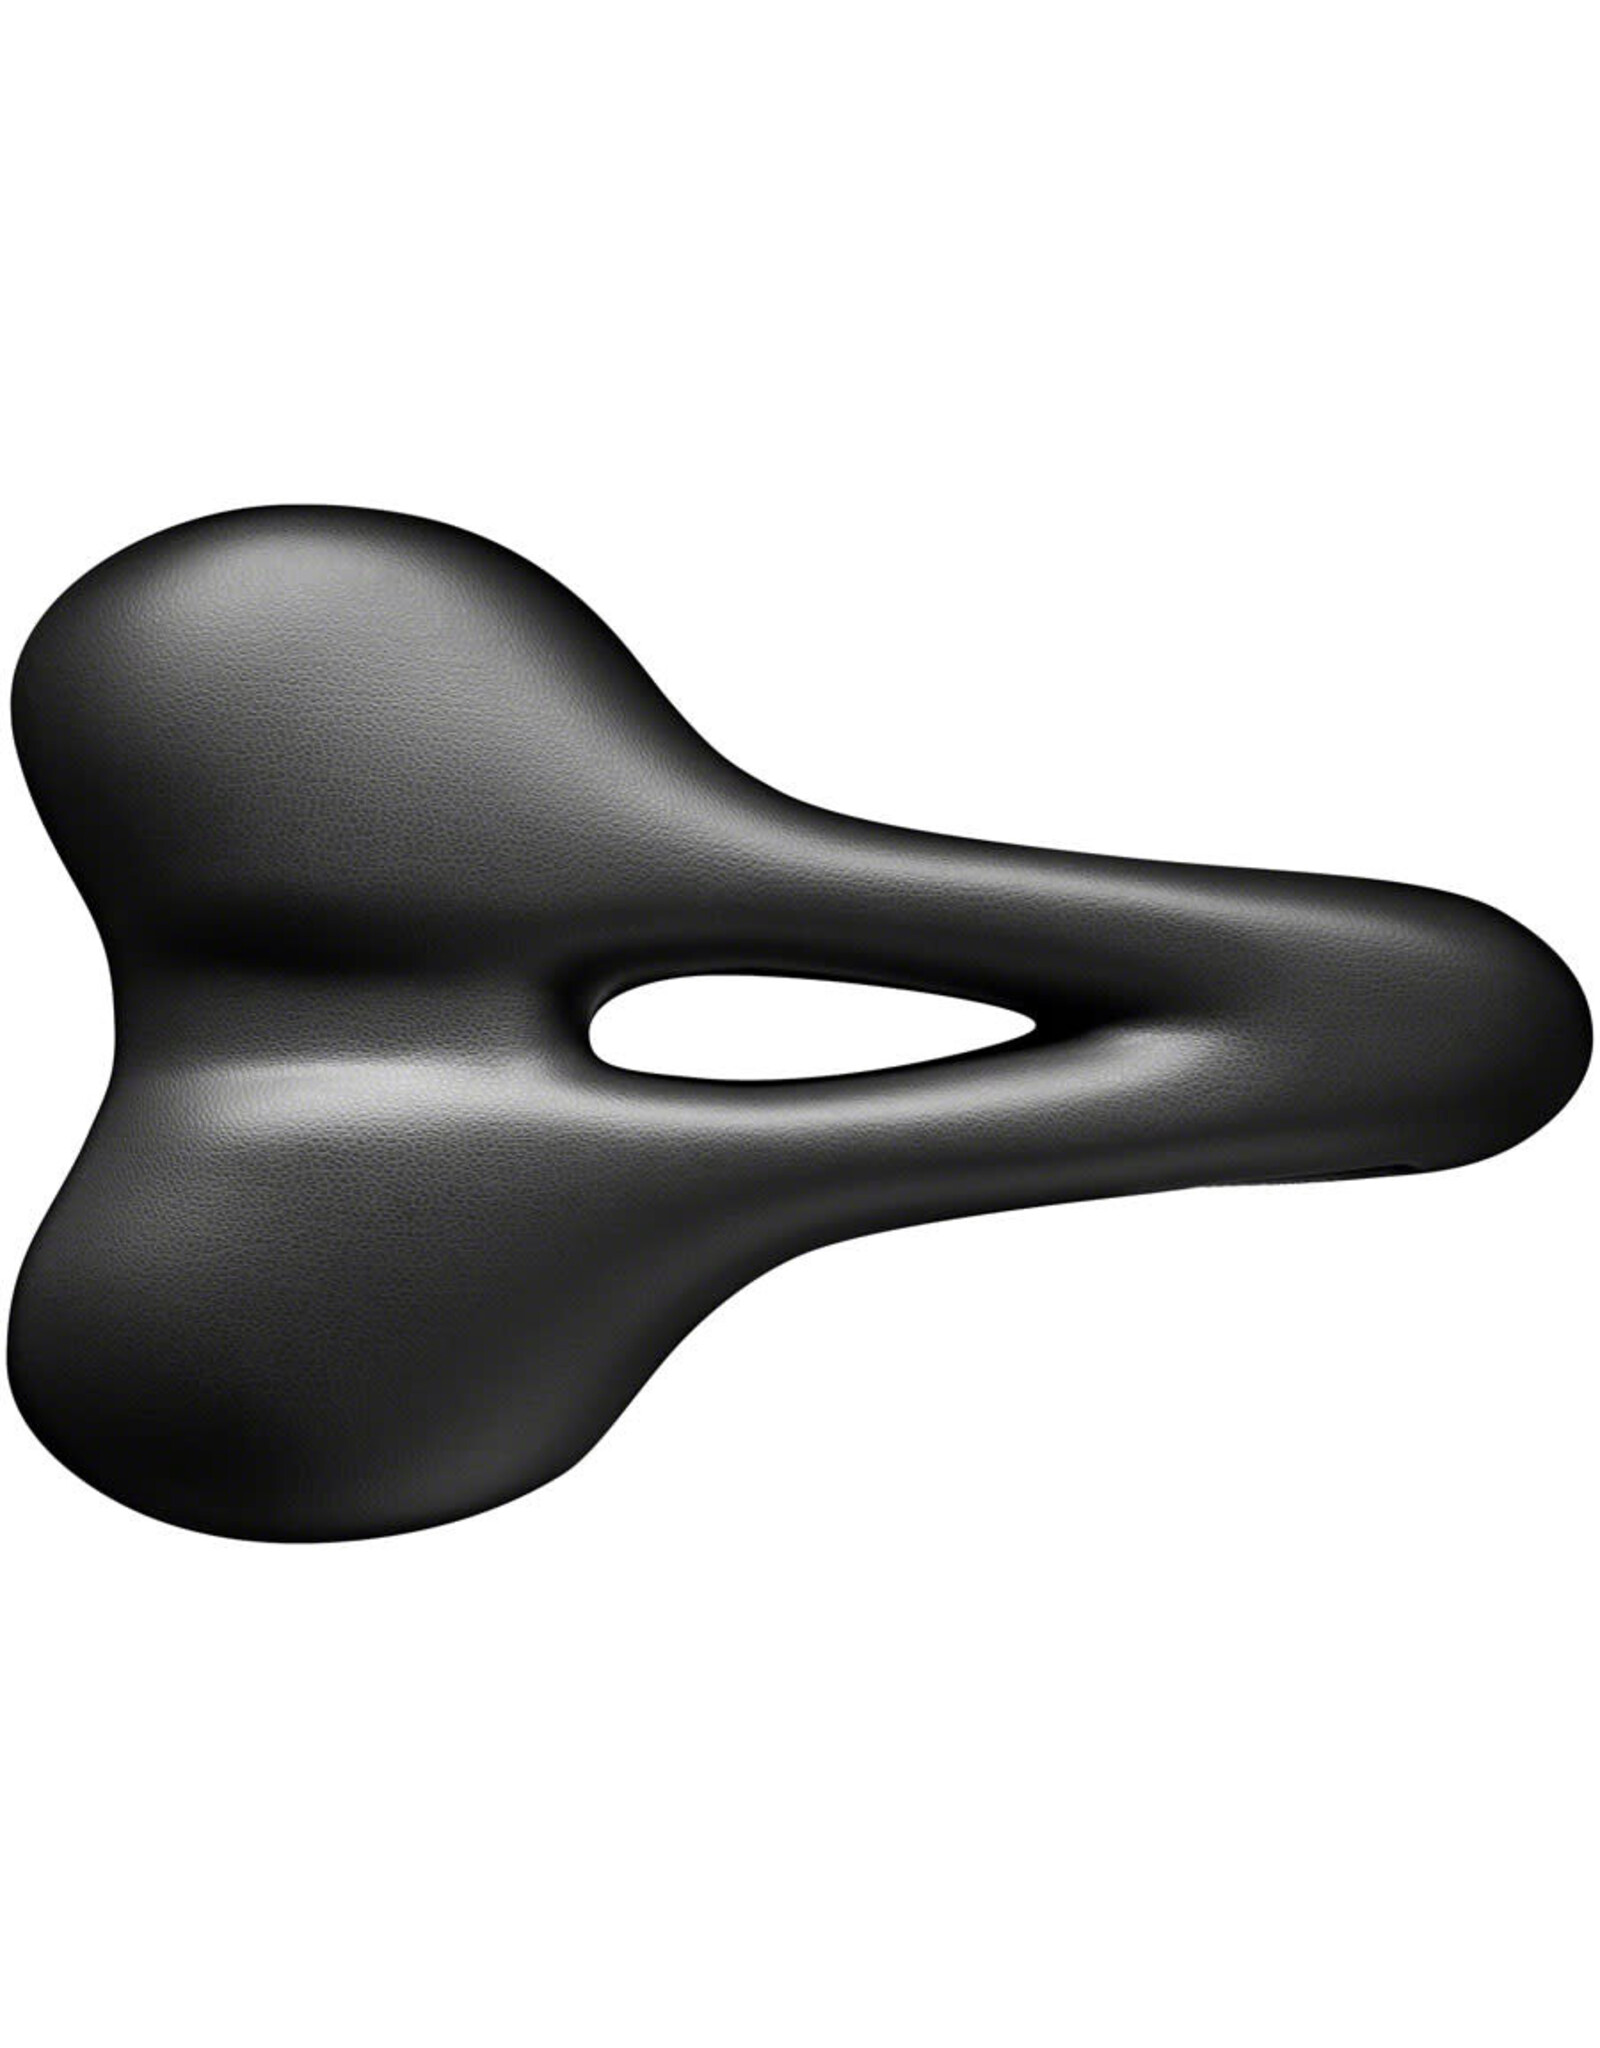 Selle San Marco Selle San Marco Trekking Open-Fit Saddle Small